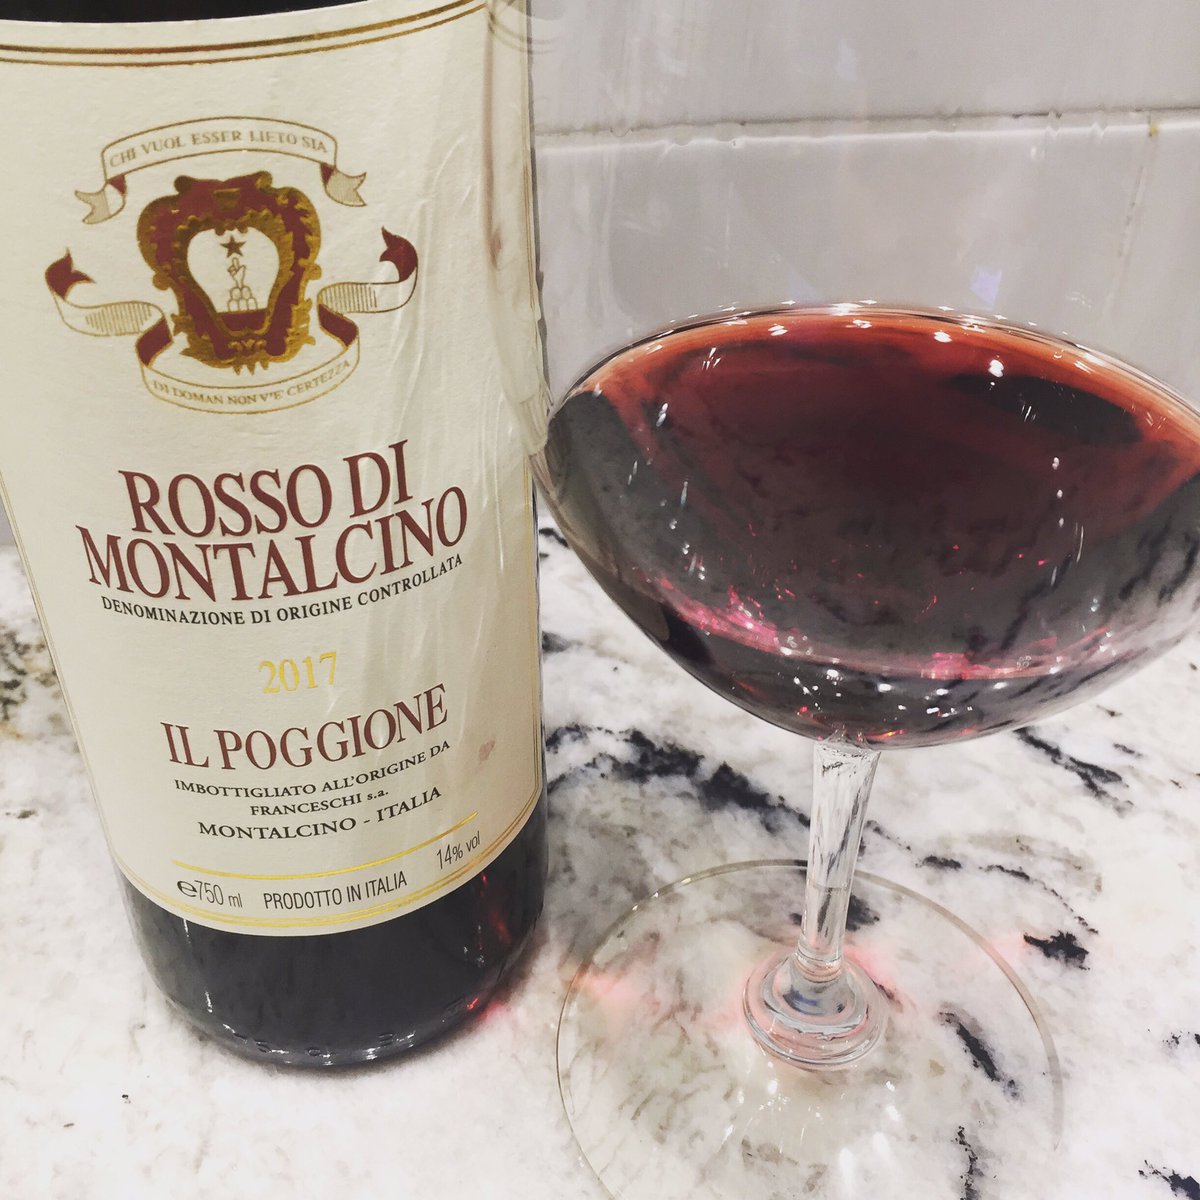 This 2017 Rosso di Montalcino from Il Poggione is drinking beautifully. Dusty cherry, leather, violets, thyme and raspberry, with firm tannins and juicy, dry fruit and acidity. Super tasty. #tuscanwine #tuscany #montalcino #yyc